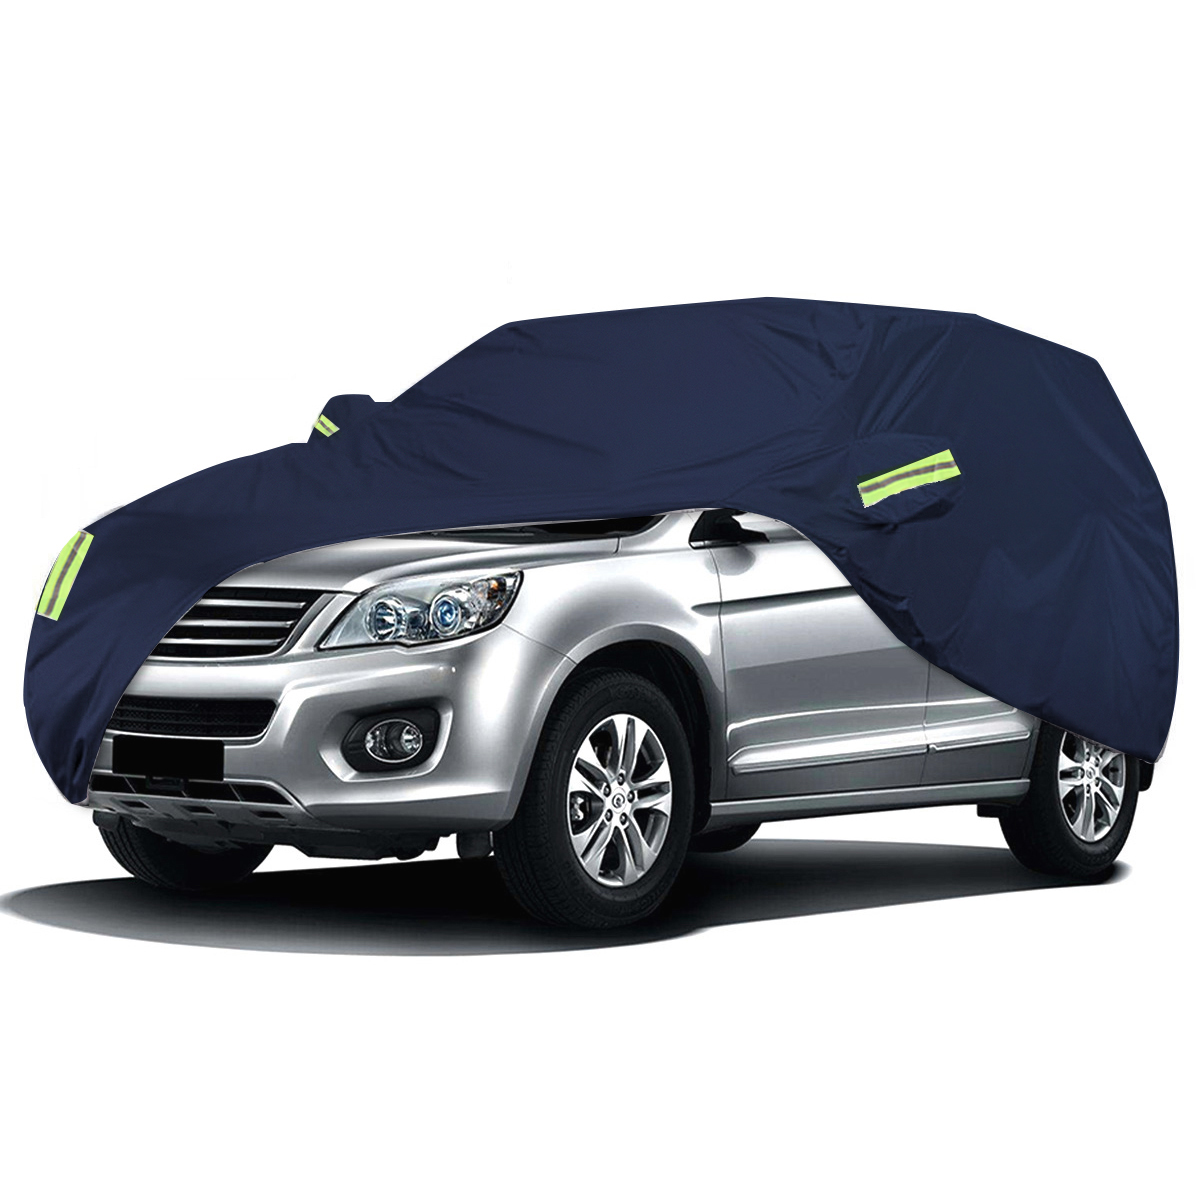 Find Full Car Cover Waterproof Dust proof UV Resistant Outdoor For SUV All Weather Protection for Sale on Gipsybee.com with cryptocurrencies